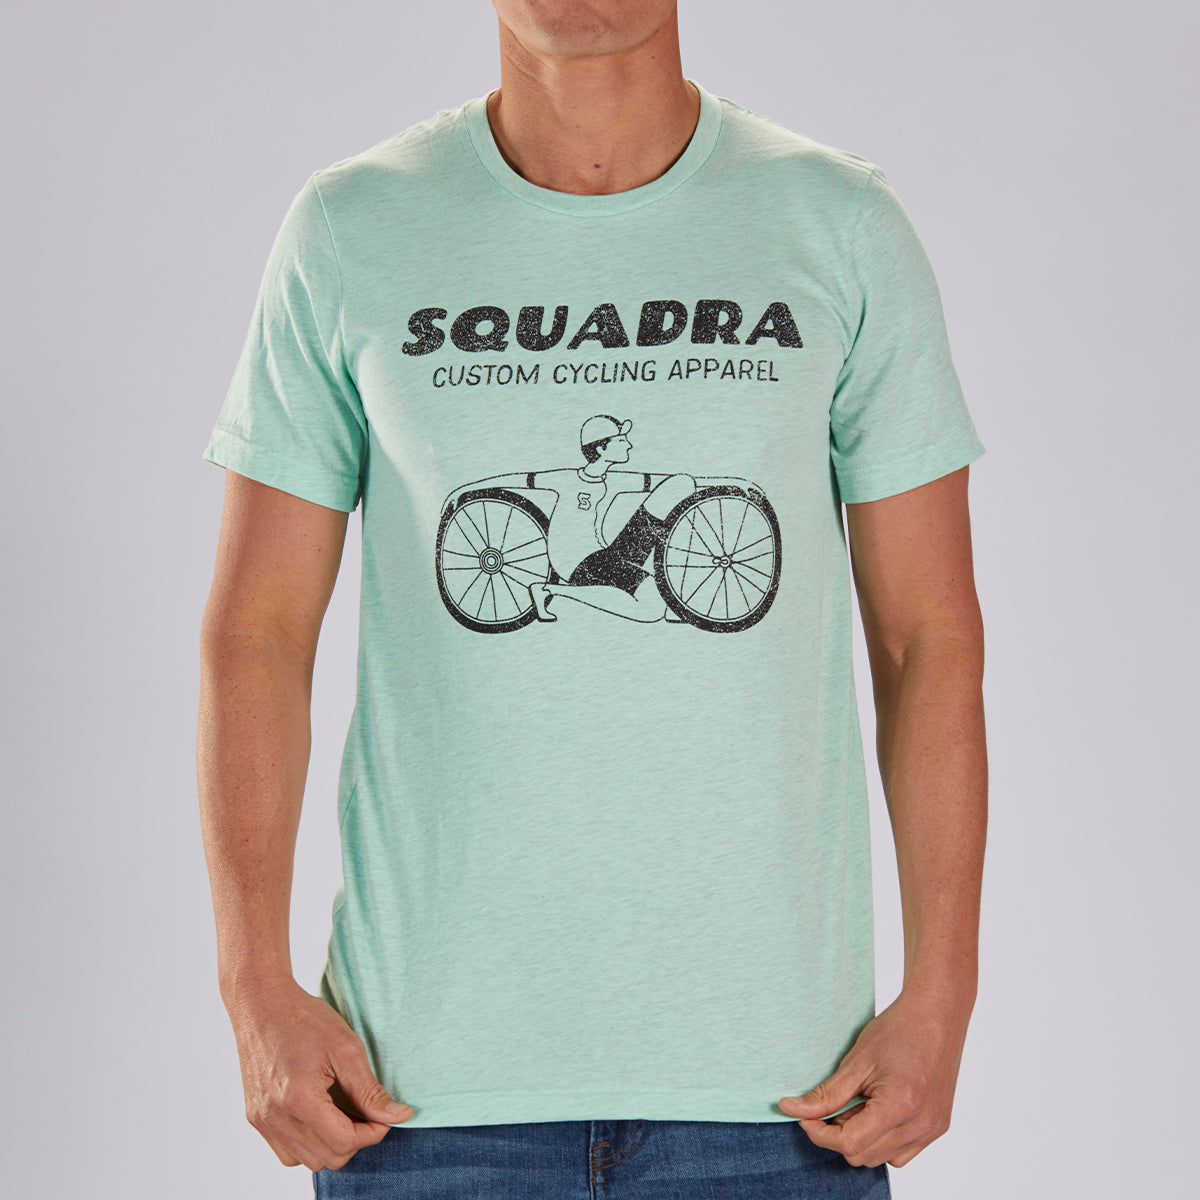 MENS LIMITED EDITION COTTON TEE - MINT  "SQUADRA DUDE"